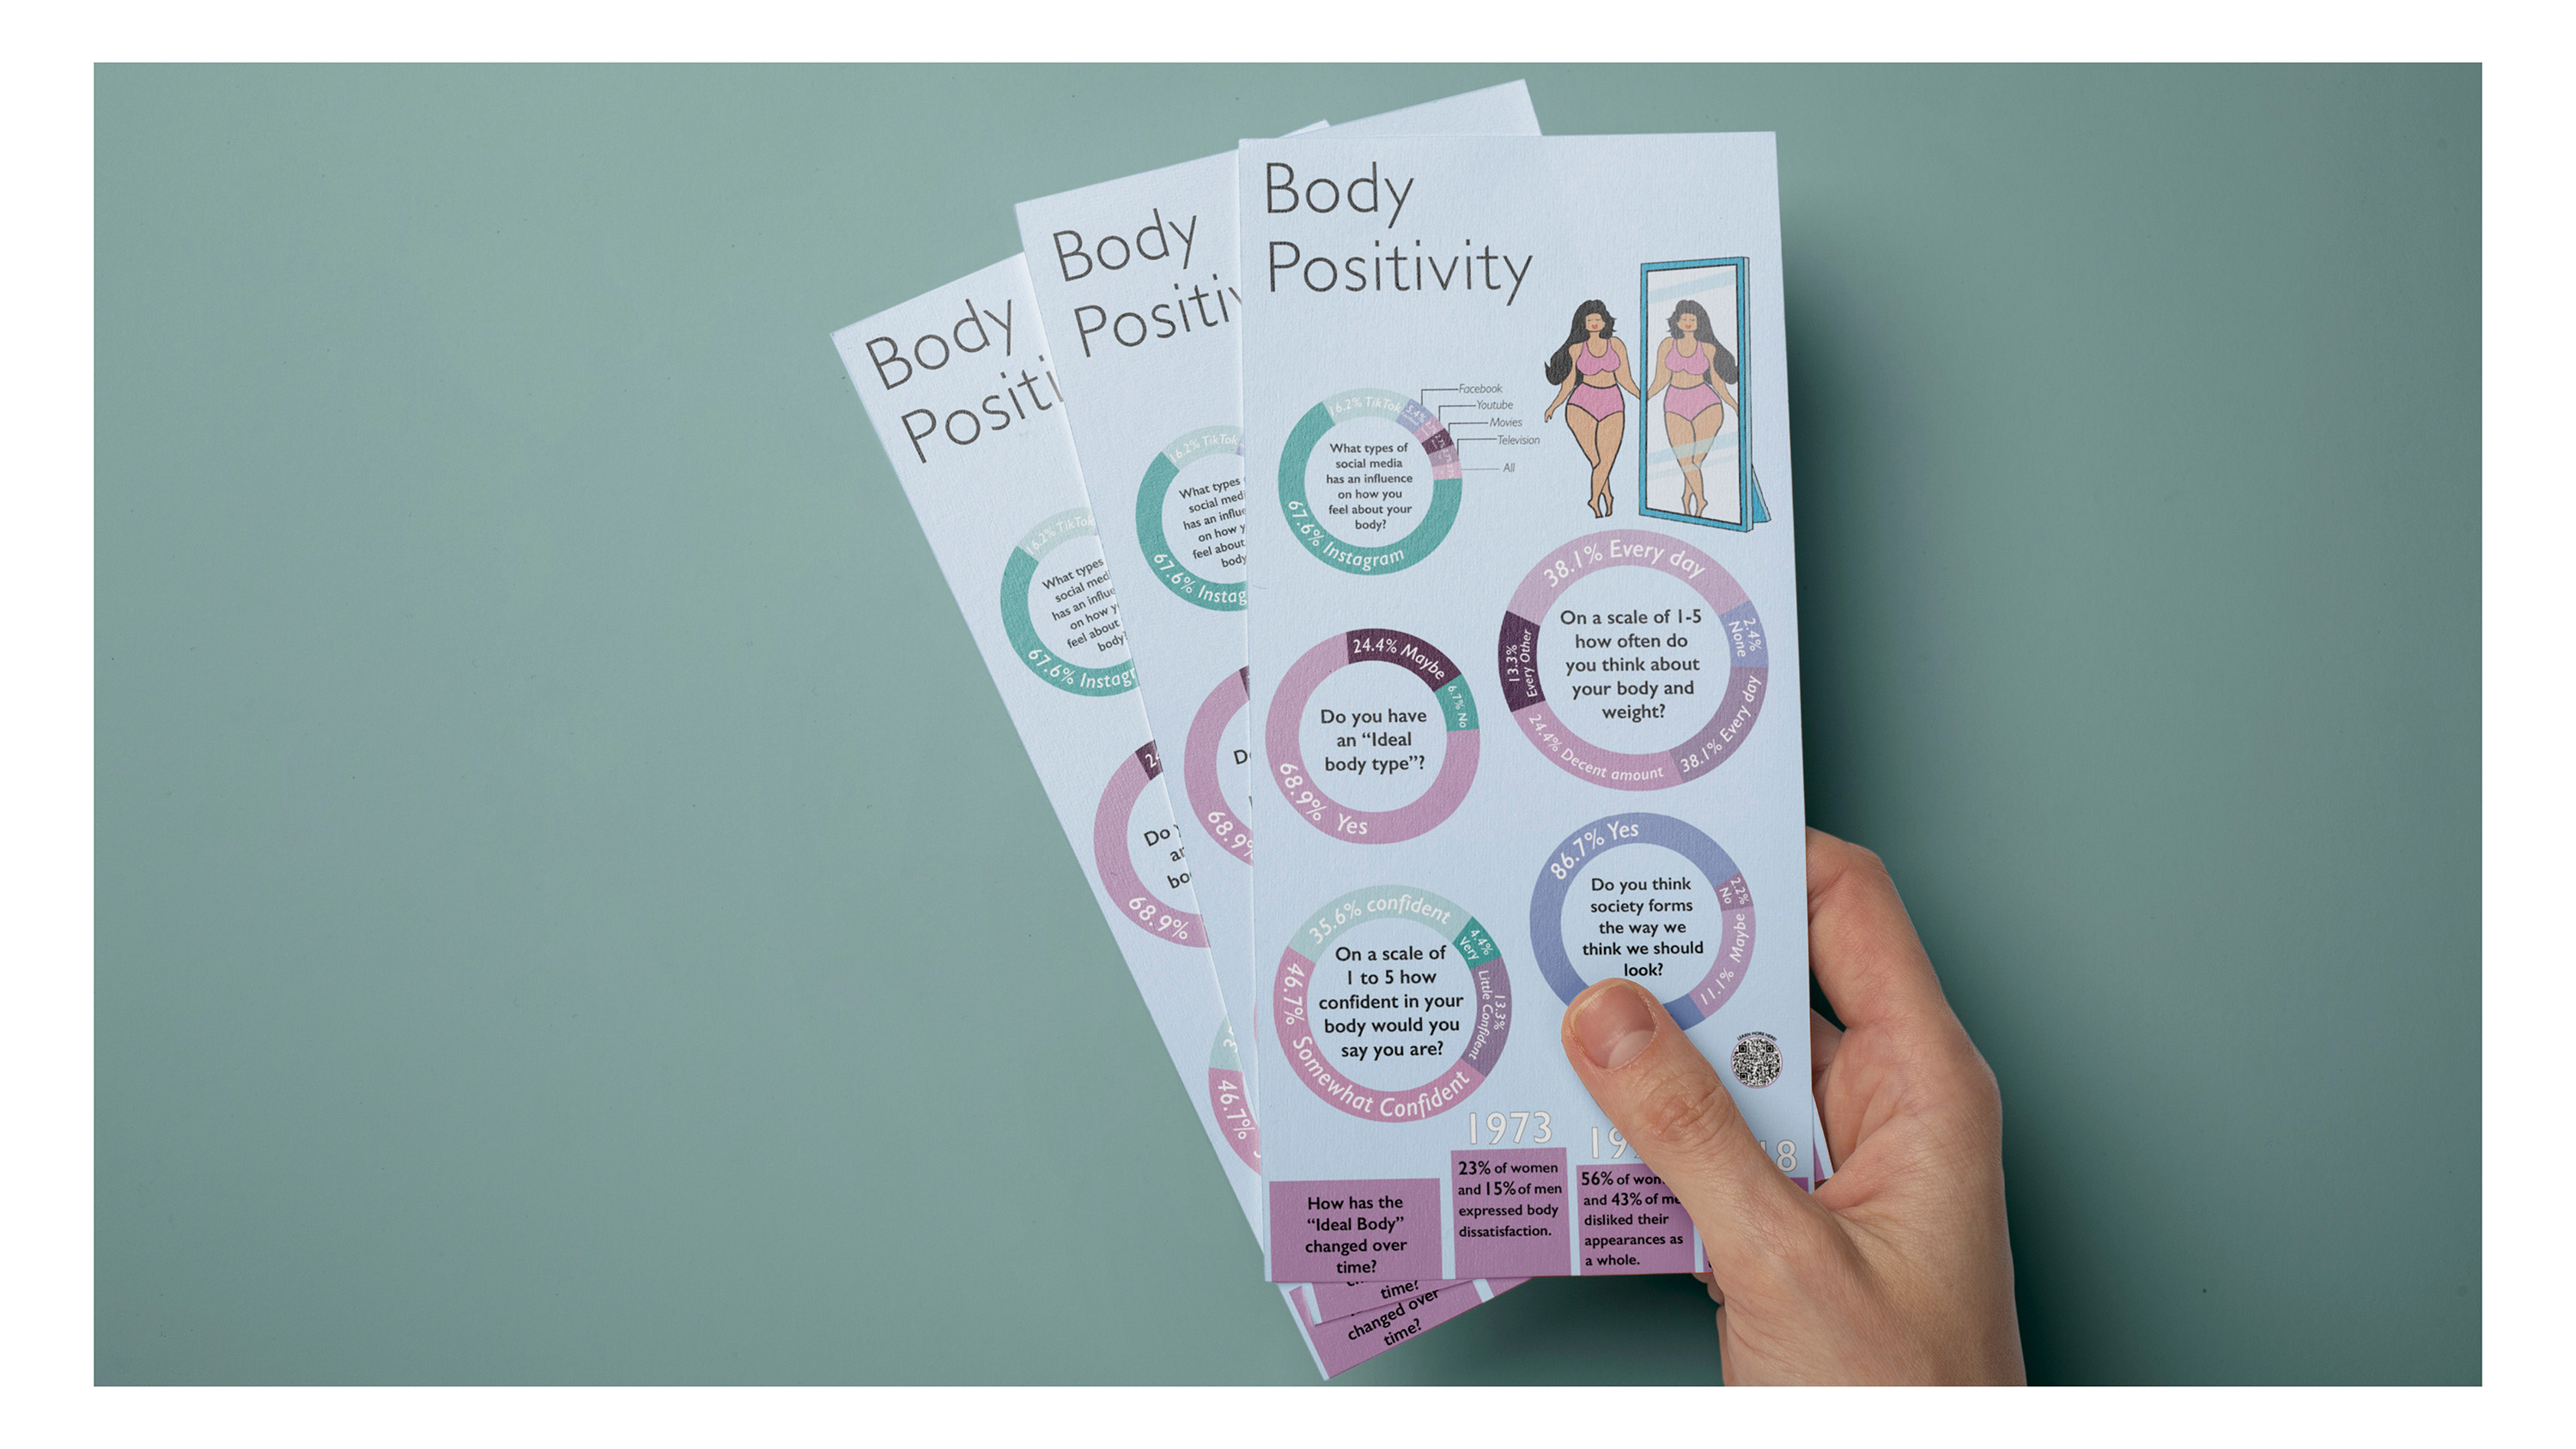 Body Positivity Infographic / “Body Positivity Infographic,” Infographic, 19.1 x 39.1in print, 2022. This Infographic presents a survey that I sent out in regards to body image. Over 65 people took the survey. 